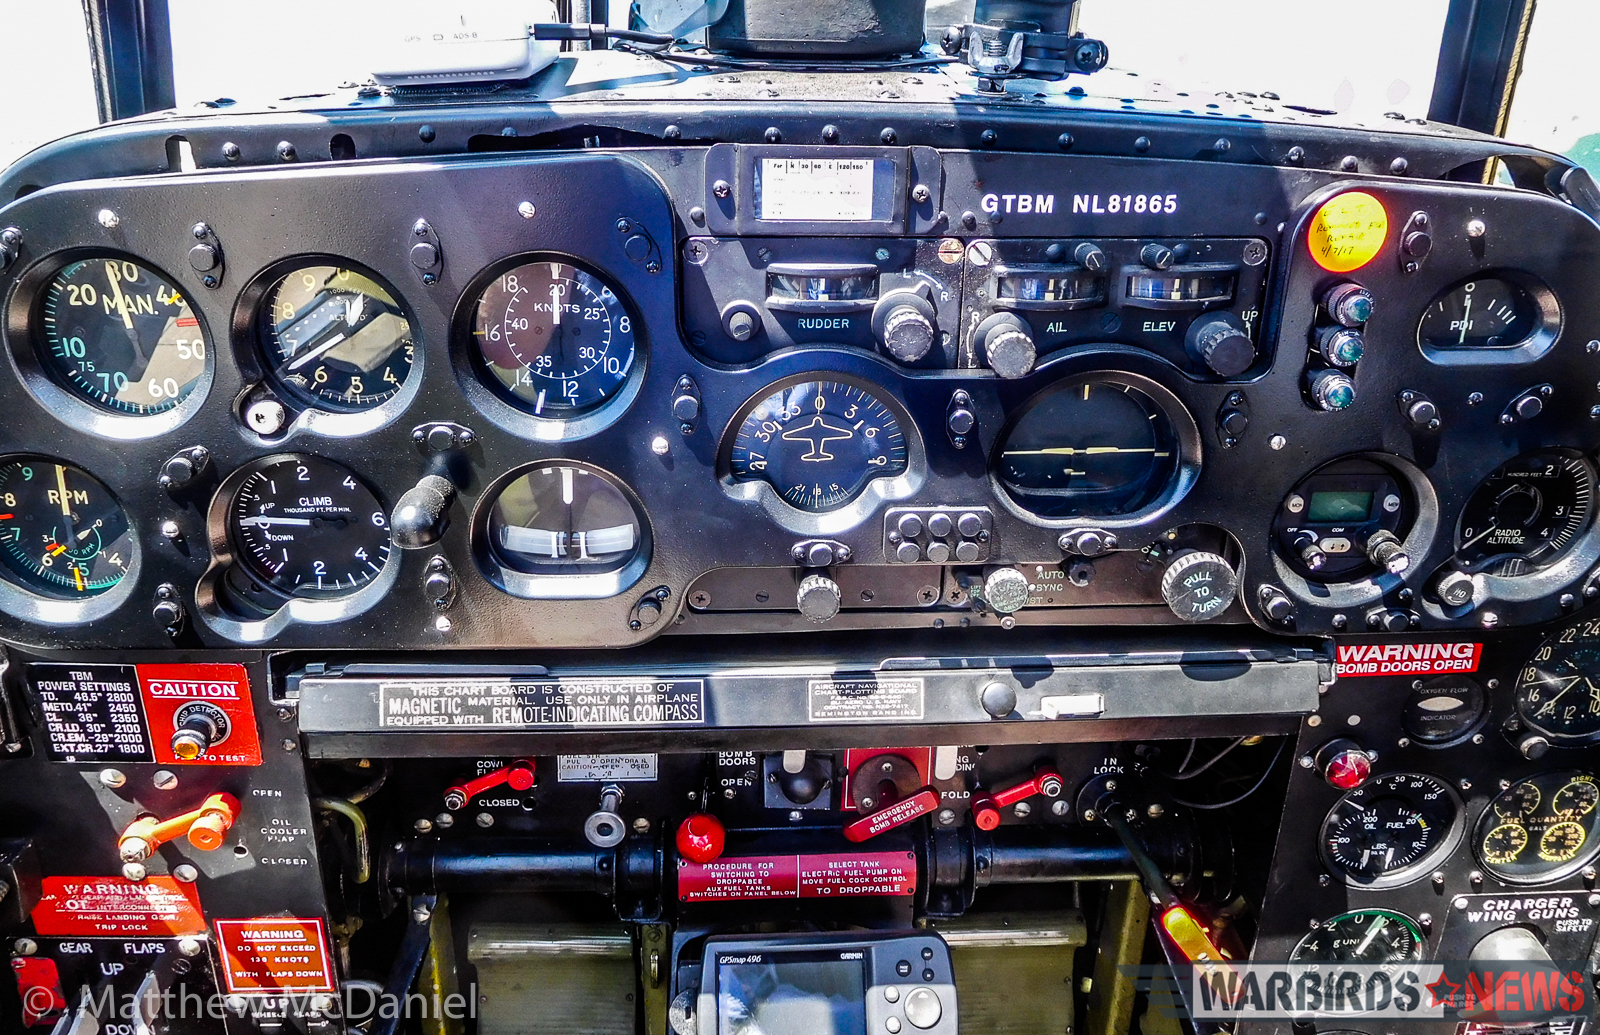 The pilot's main instrument panel on Deckert's TBM remains as close to original as possible. The critical trim indicators are situated front and center. Flap and gear levers are at the lower left corner of photo. (Photo by Matthew McDaniel)